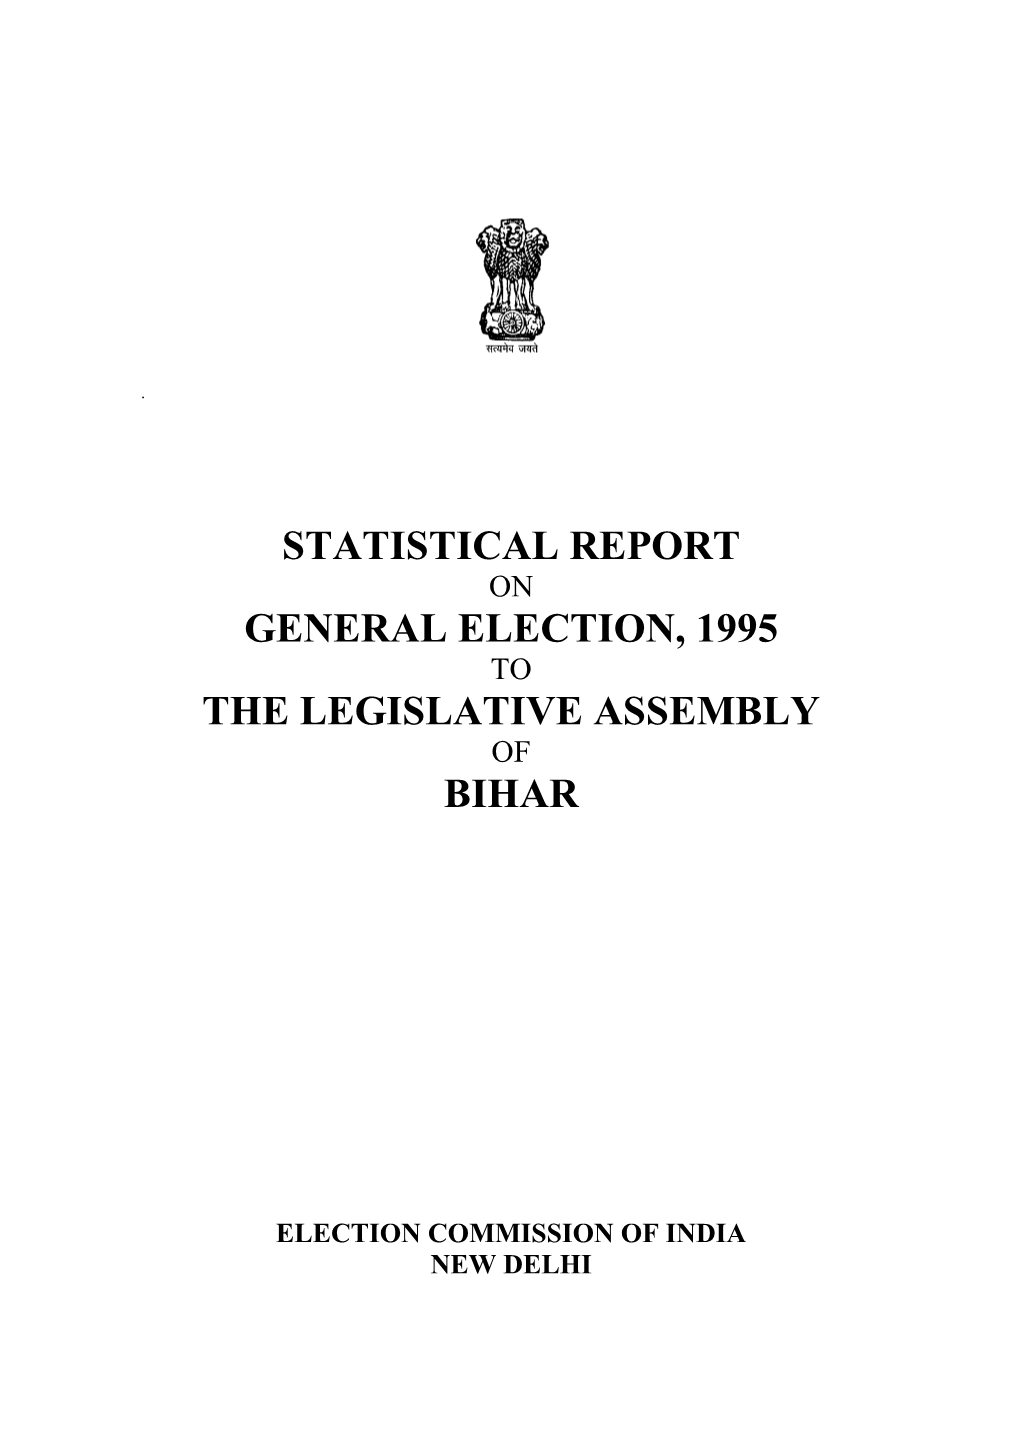 Statistical Report General Election, 1995 The